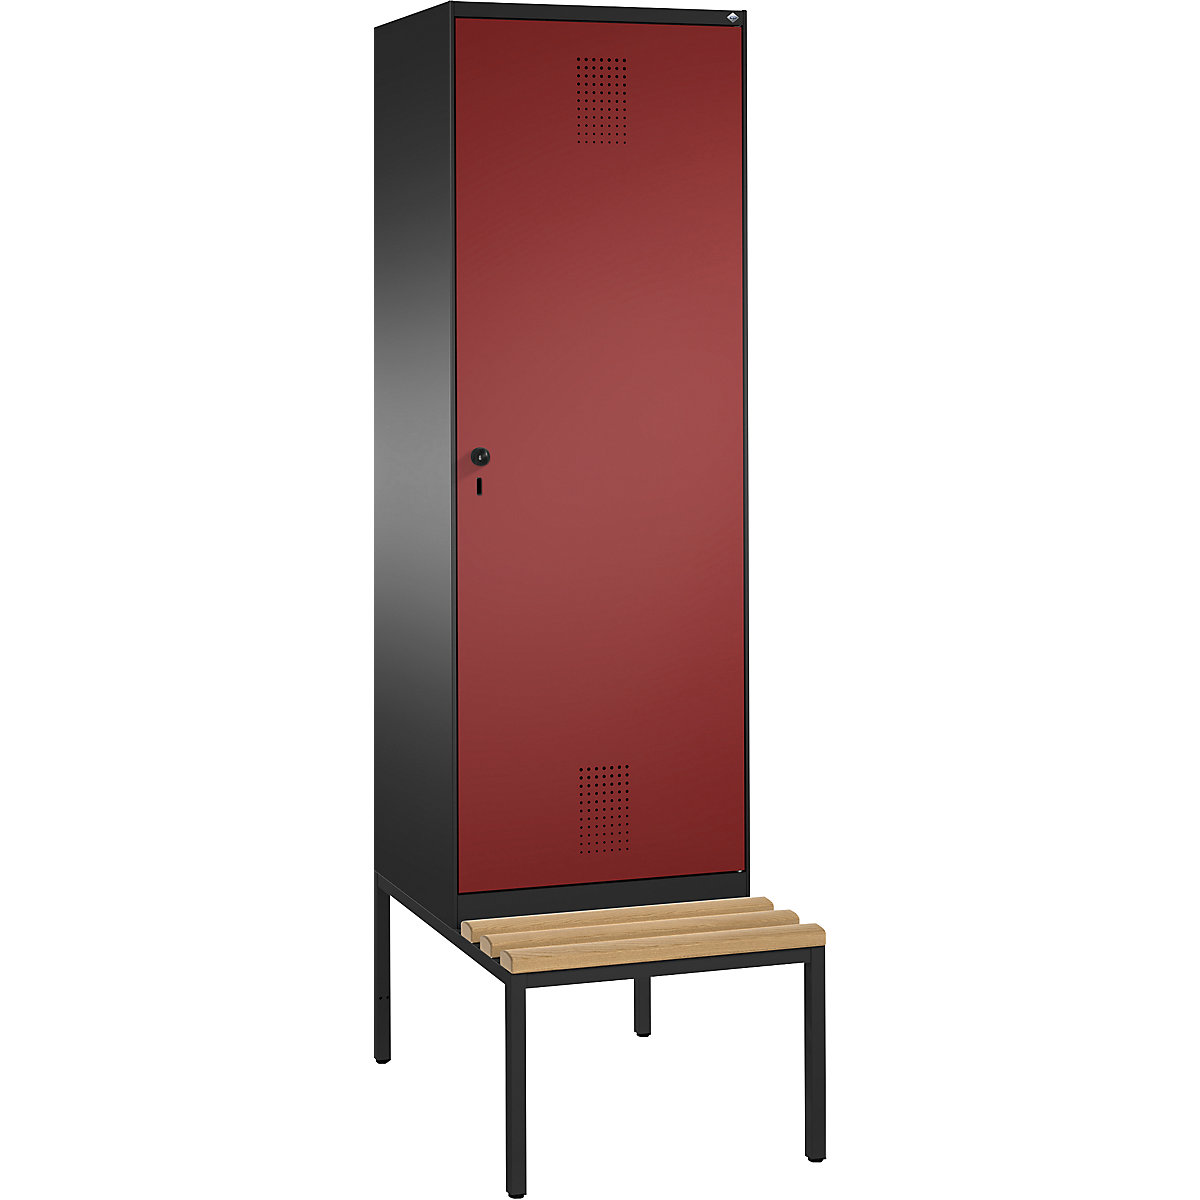 EVOLO cloakroom locker, with bench, door for 2 compartments – C+P, 2 compartments, 1 door, compartment width 300 mm, black grey / ruby red-3